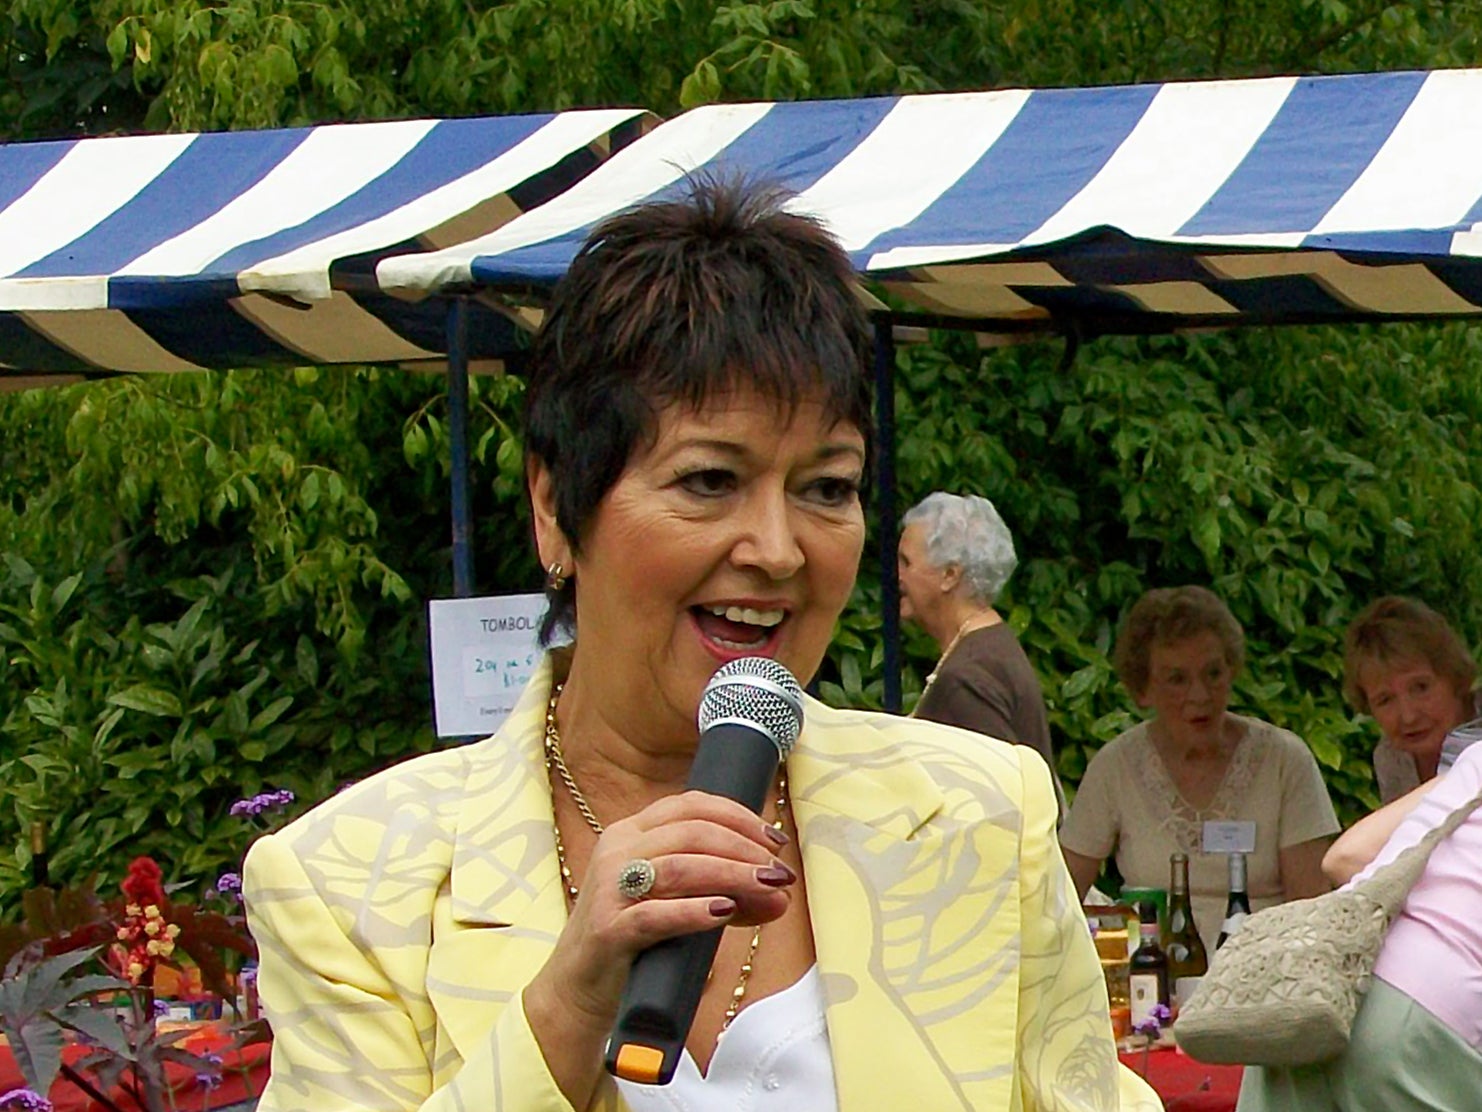 Ruth Madoc has died, aged 79